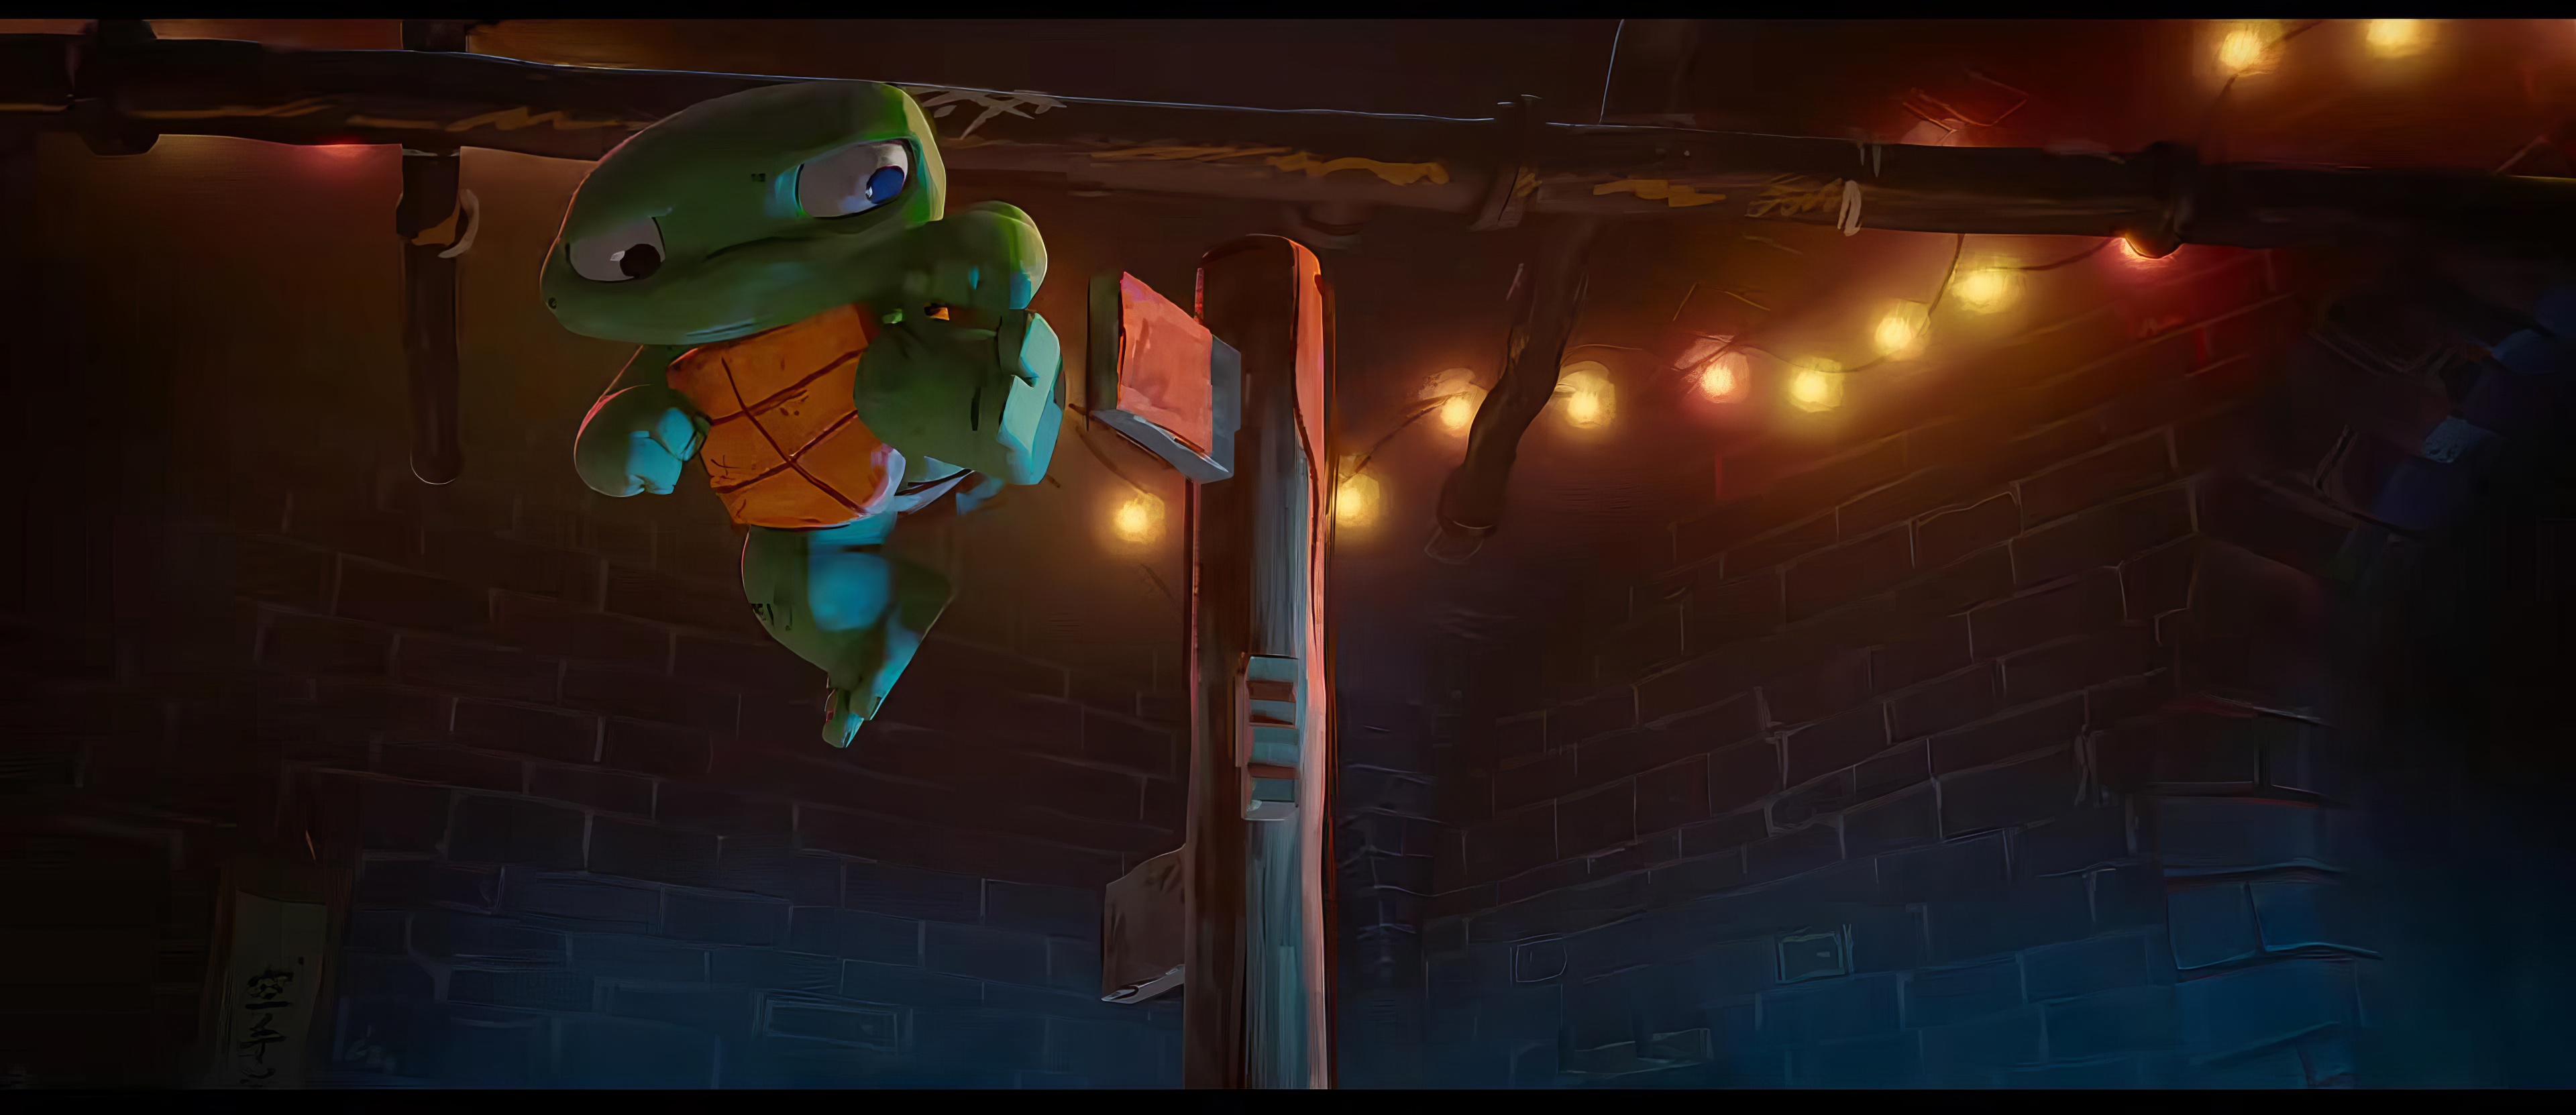 Teenage Mutant Ninja Turtle character leaping in a dynamic pose with urban background, HD wallpaper from Teenage Mutant Ninja Turtles: Mutant Mayhem.